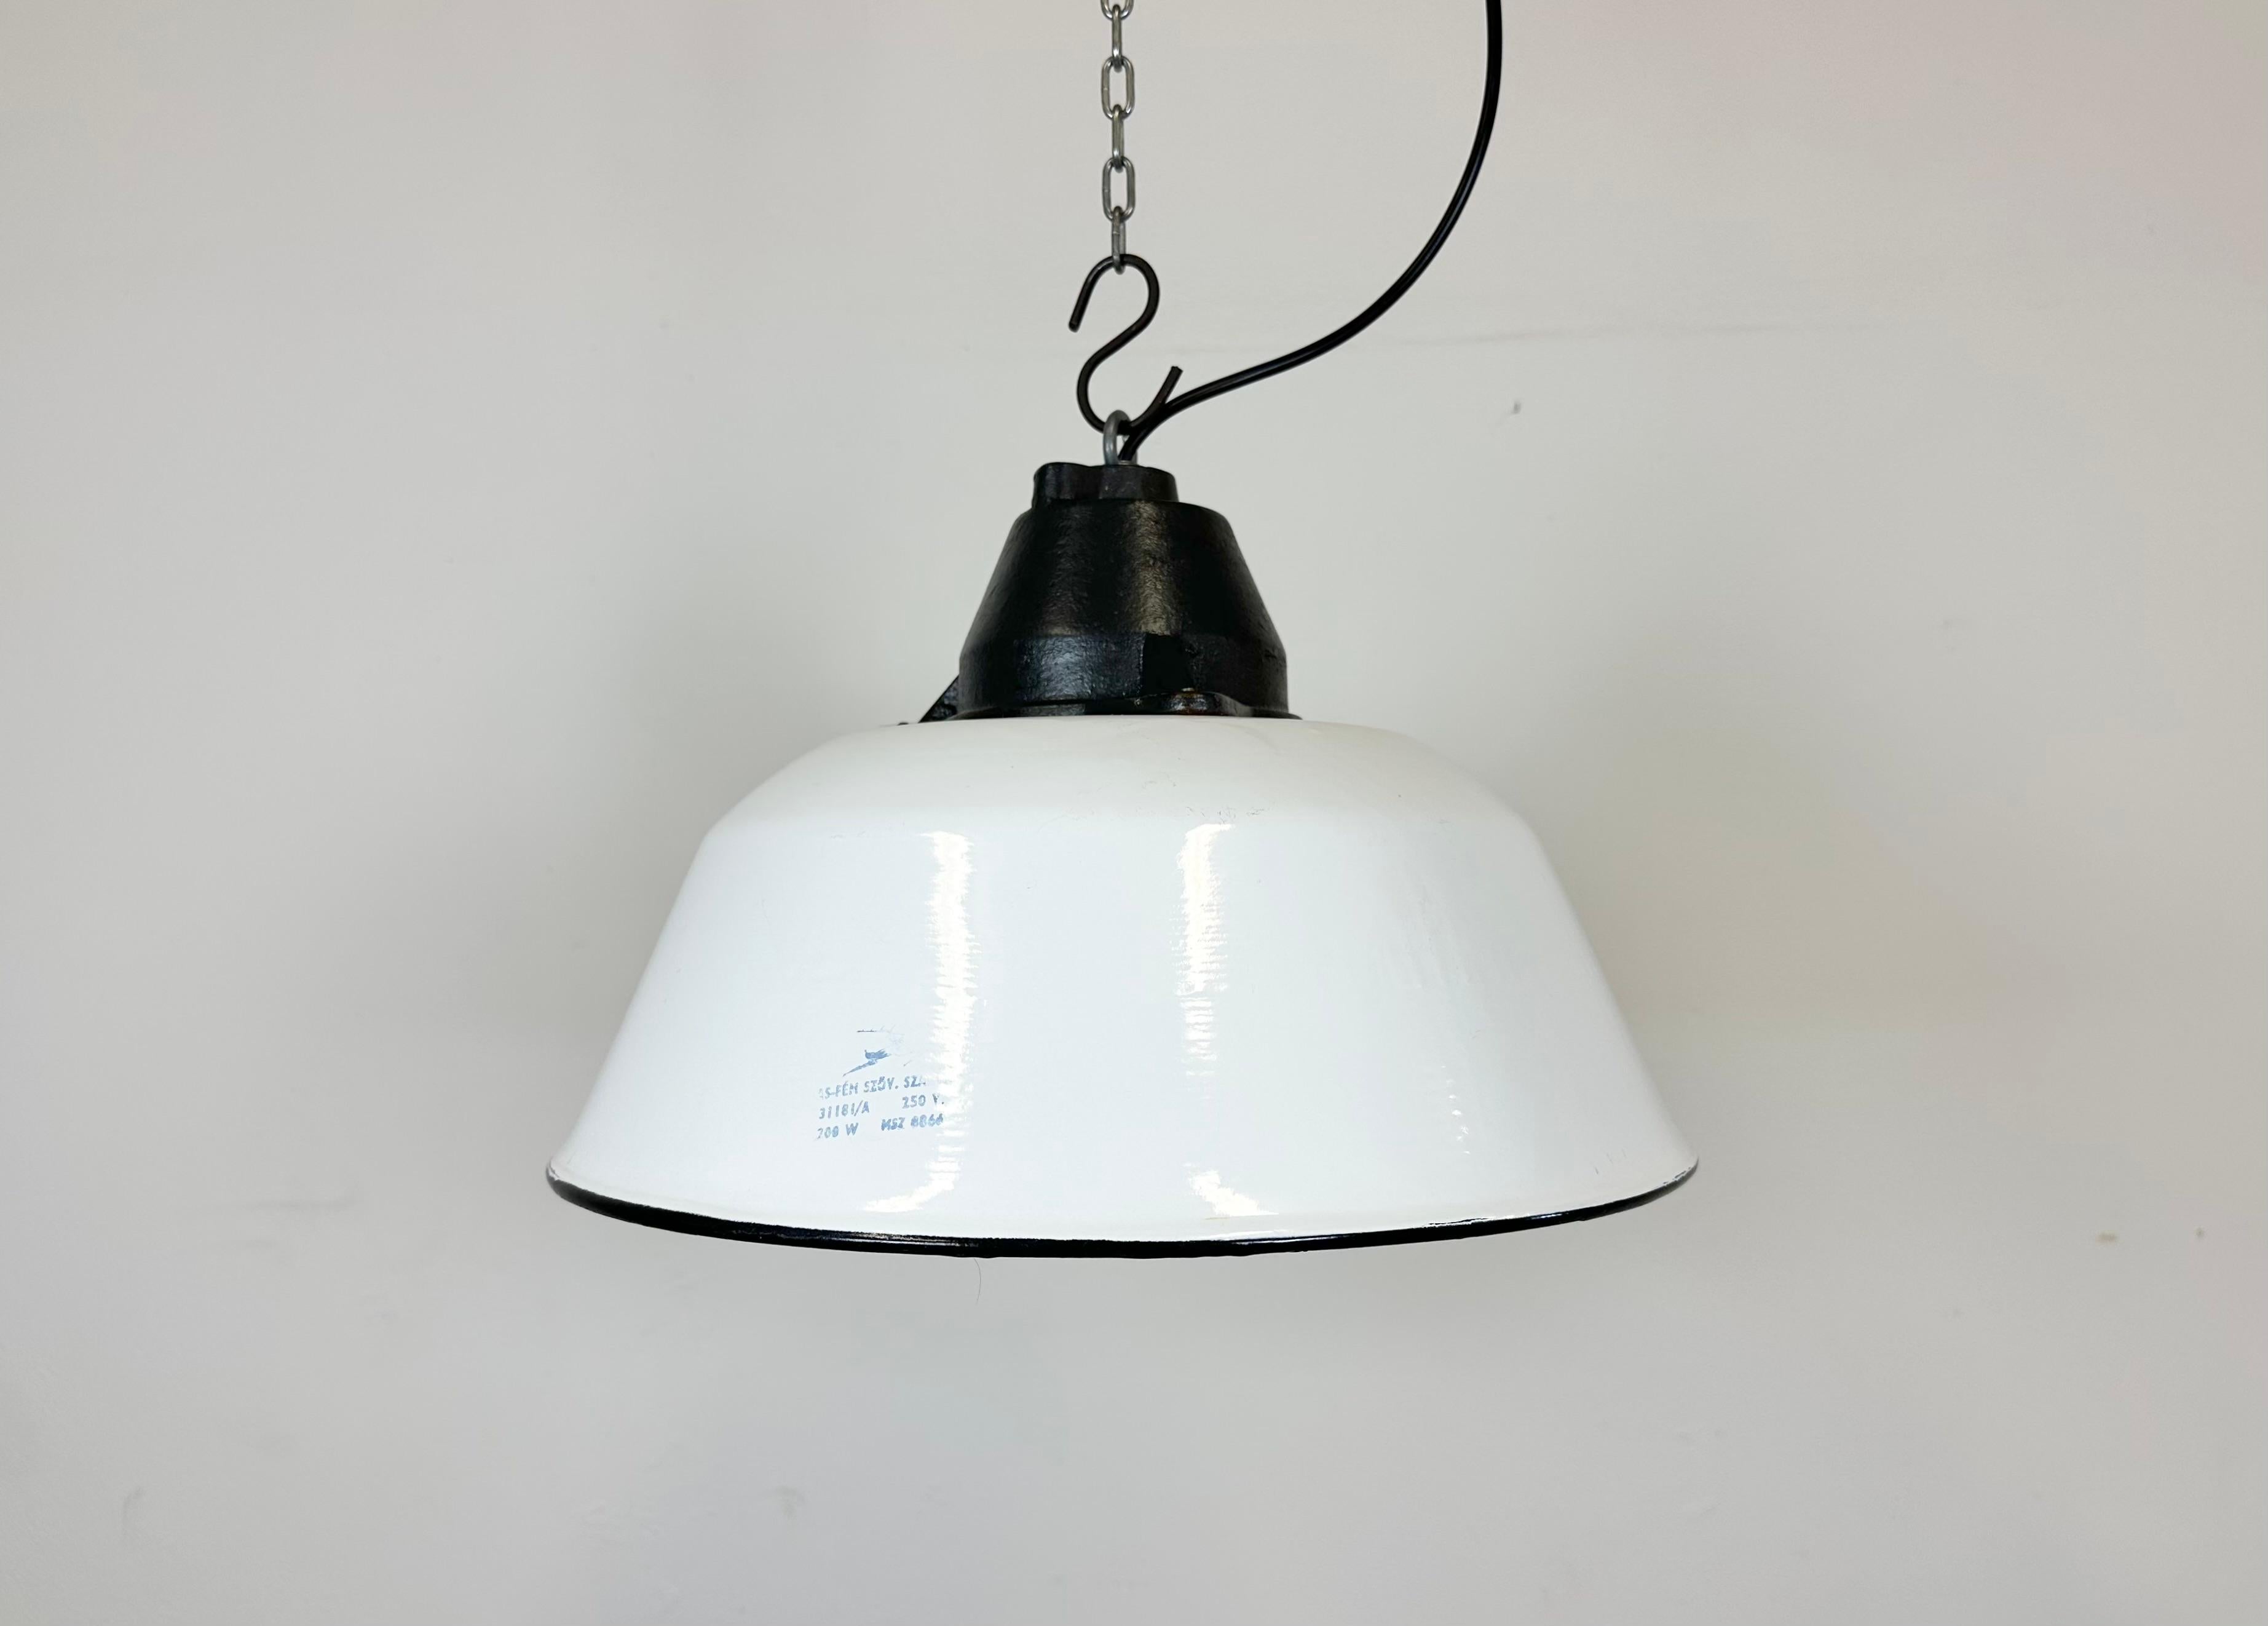 Industrial hanging lamp manufactured by Szarvasi Vas - Fém in Hungary during the 1960s. It features a white enamel shade with white enamel interior and a grey cast iron top. New porcelain socket requires standard E 27/E 26 light bulbs. New wire. The